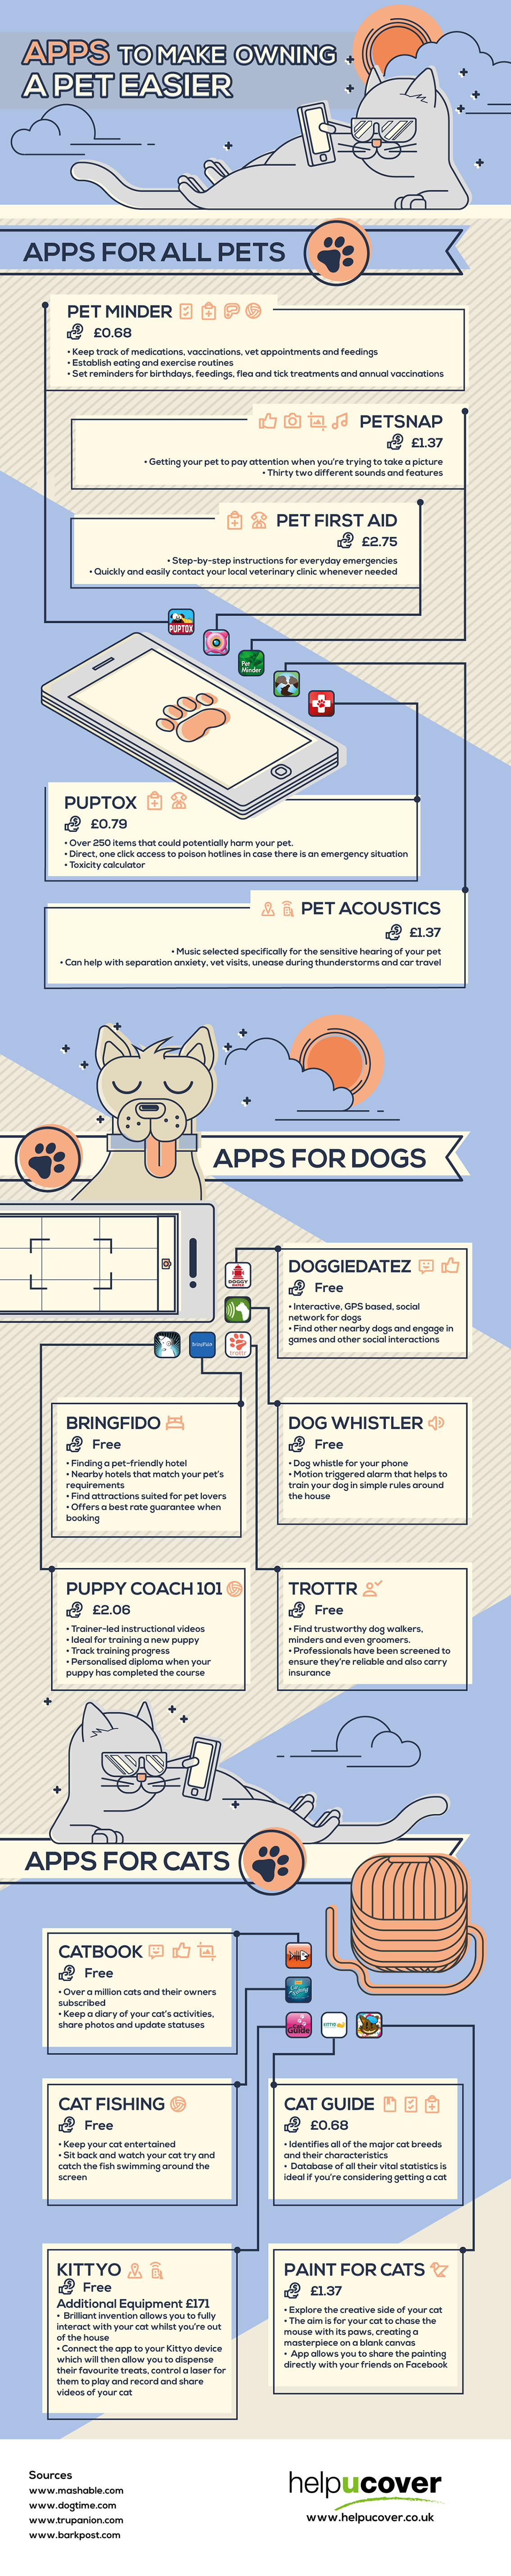 Apps to make Owning a Pet Easier Infographic